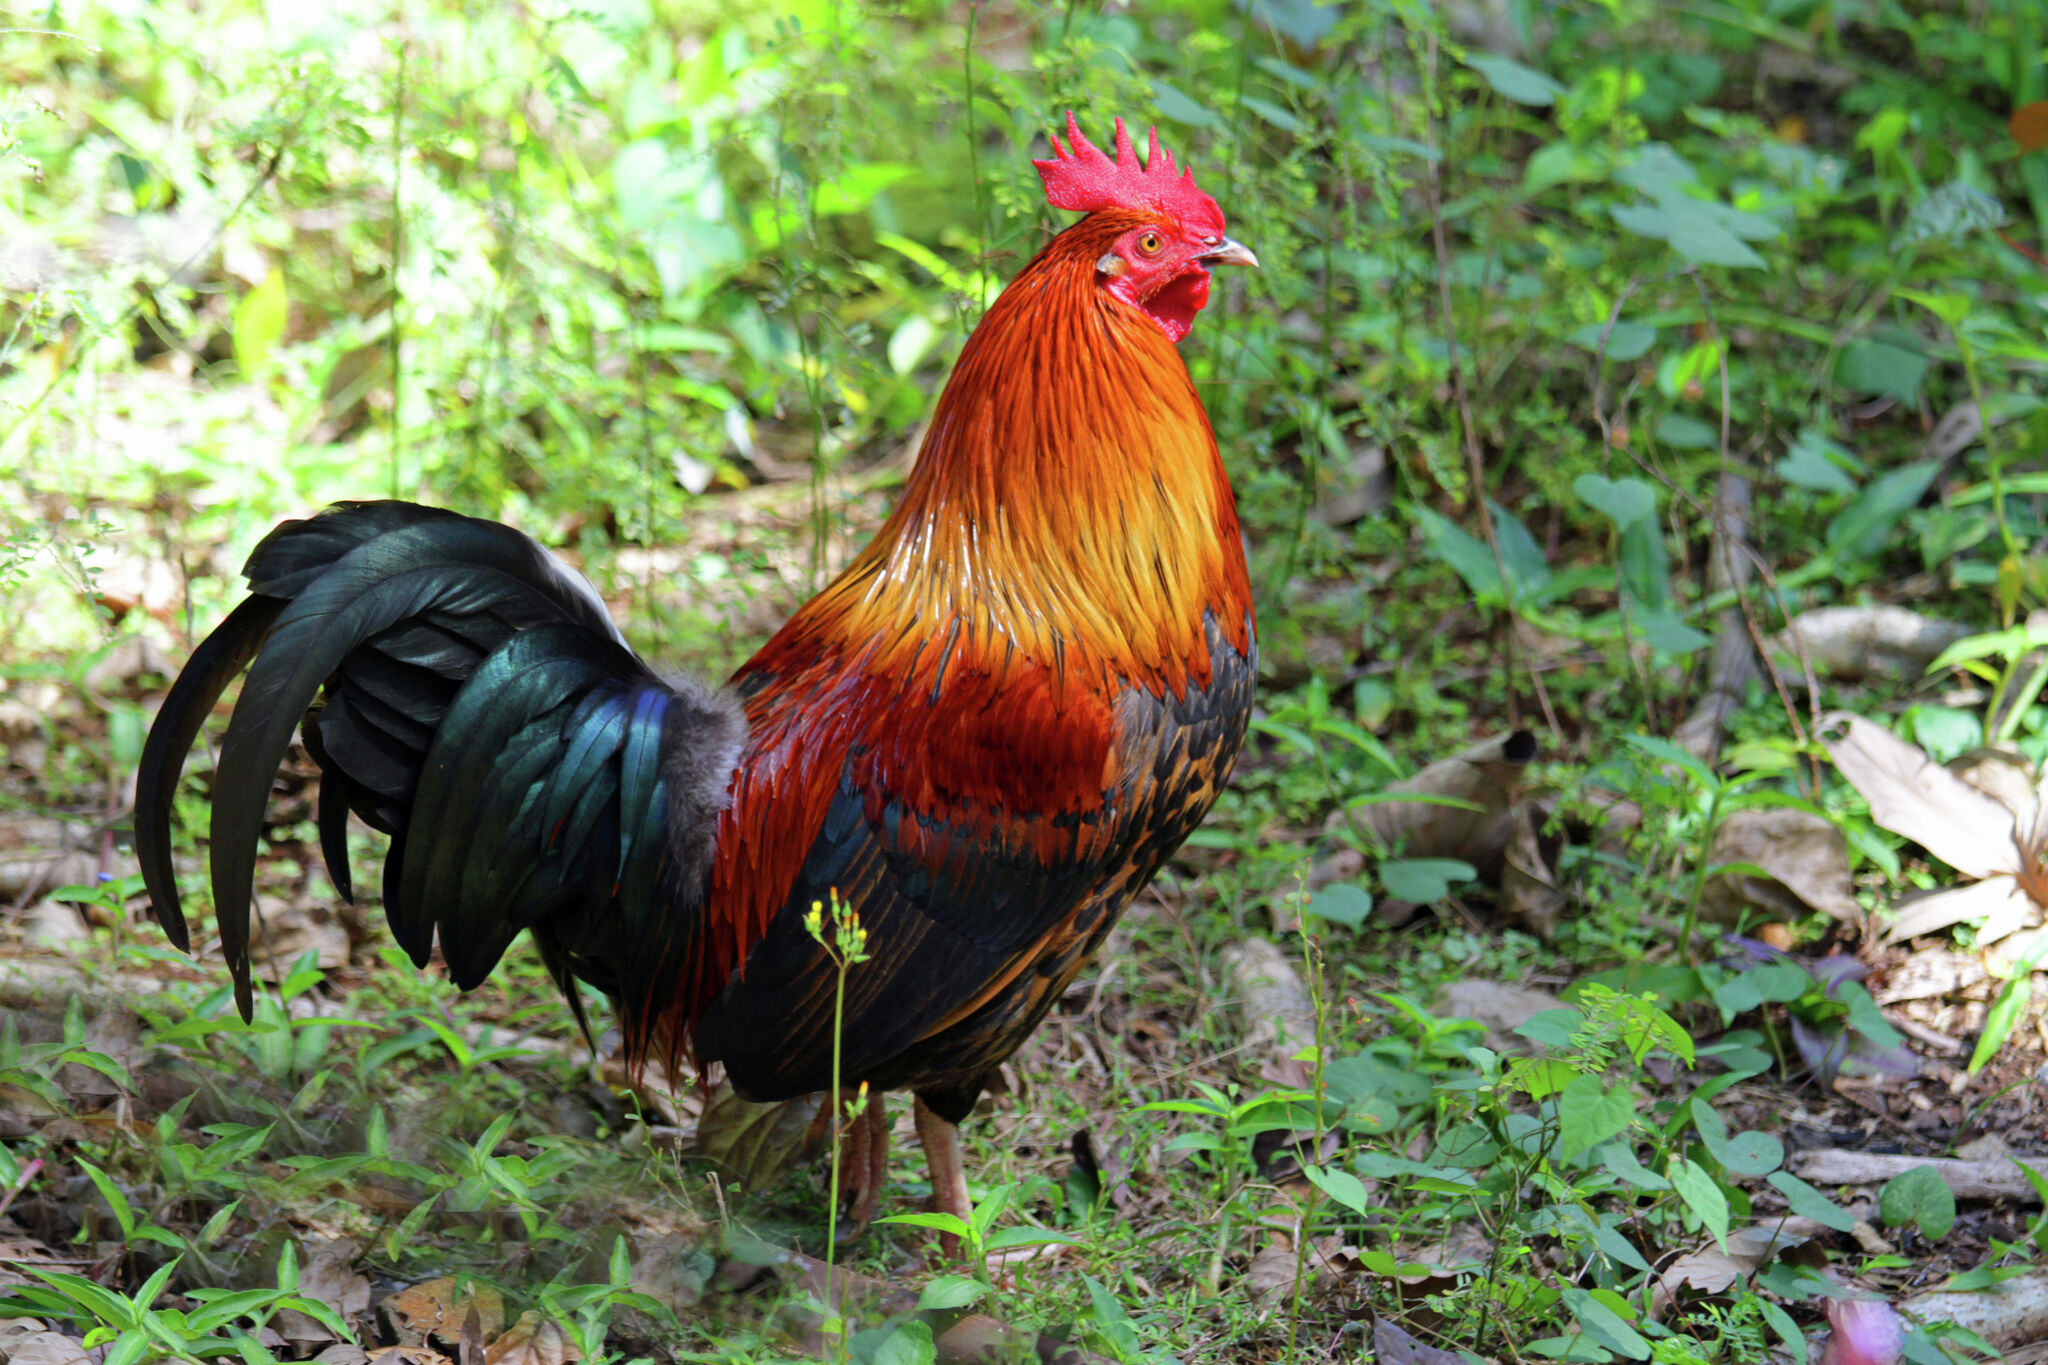 Hawaii’s feral chickens are taking over downtown Honolulu - Planet Concerns